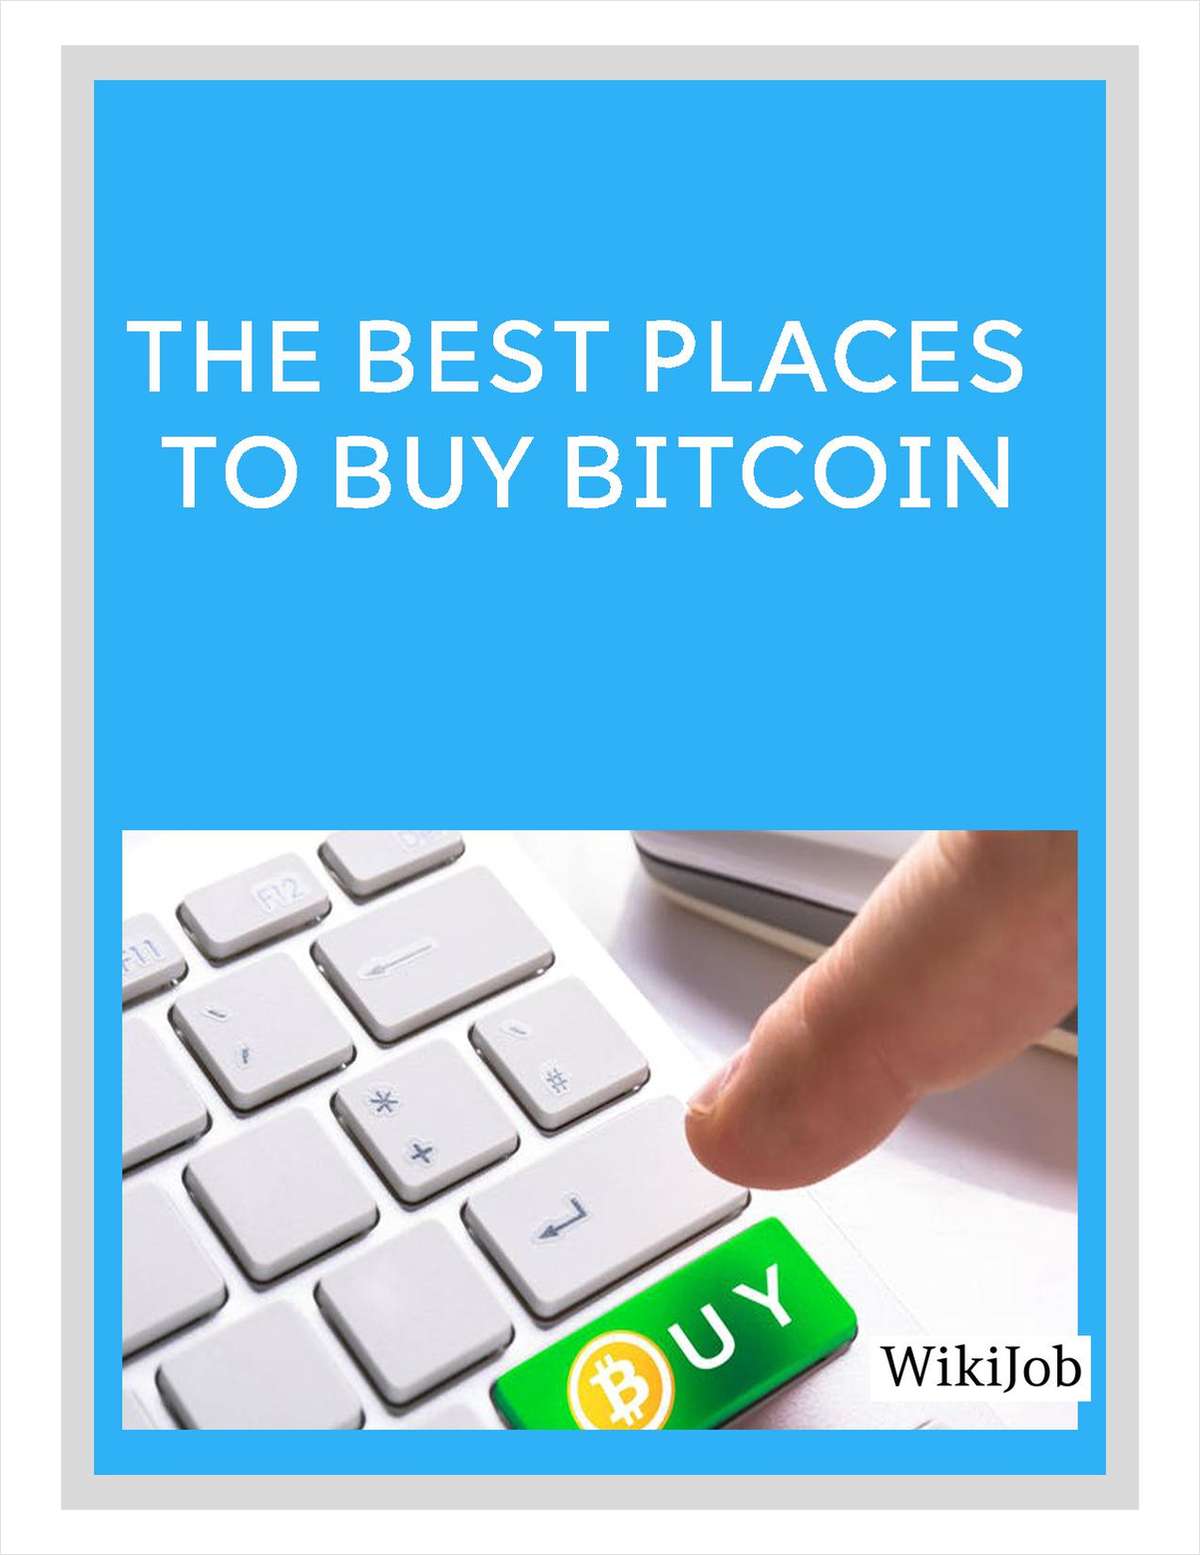 The Best Places to Buy Bitcoin